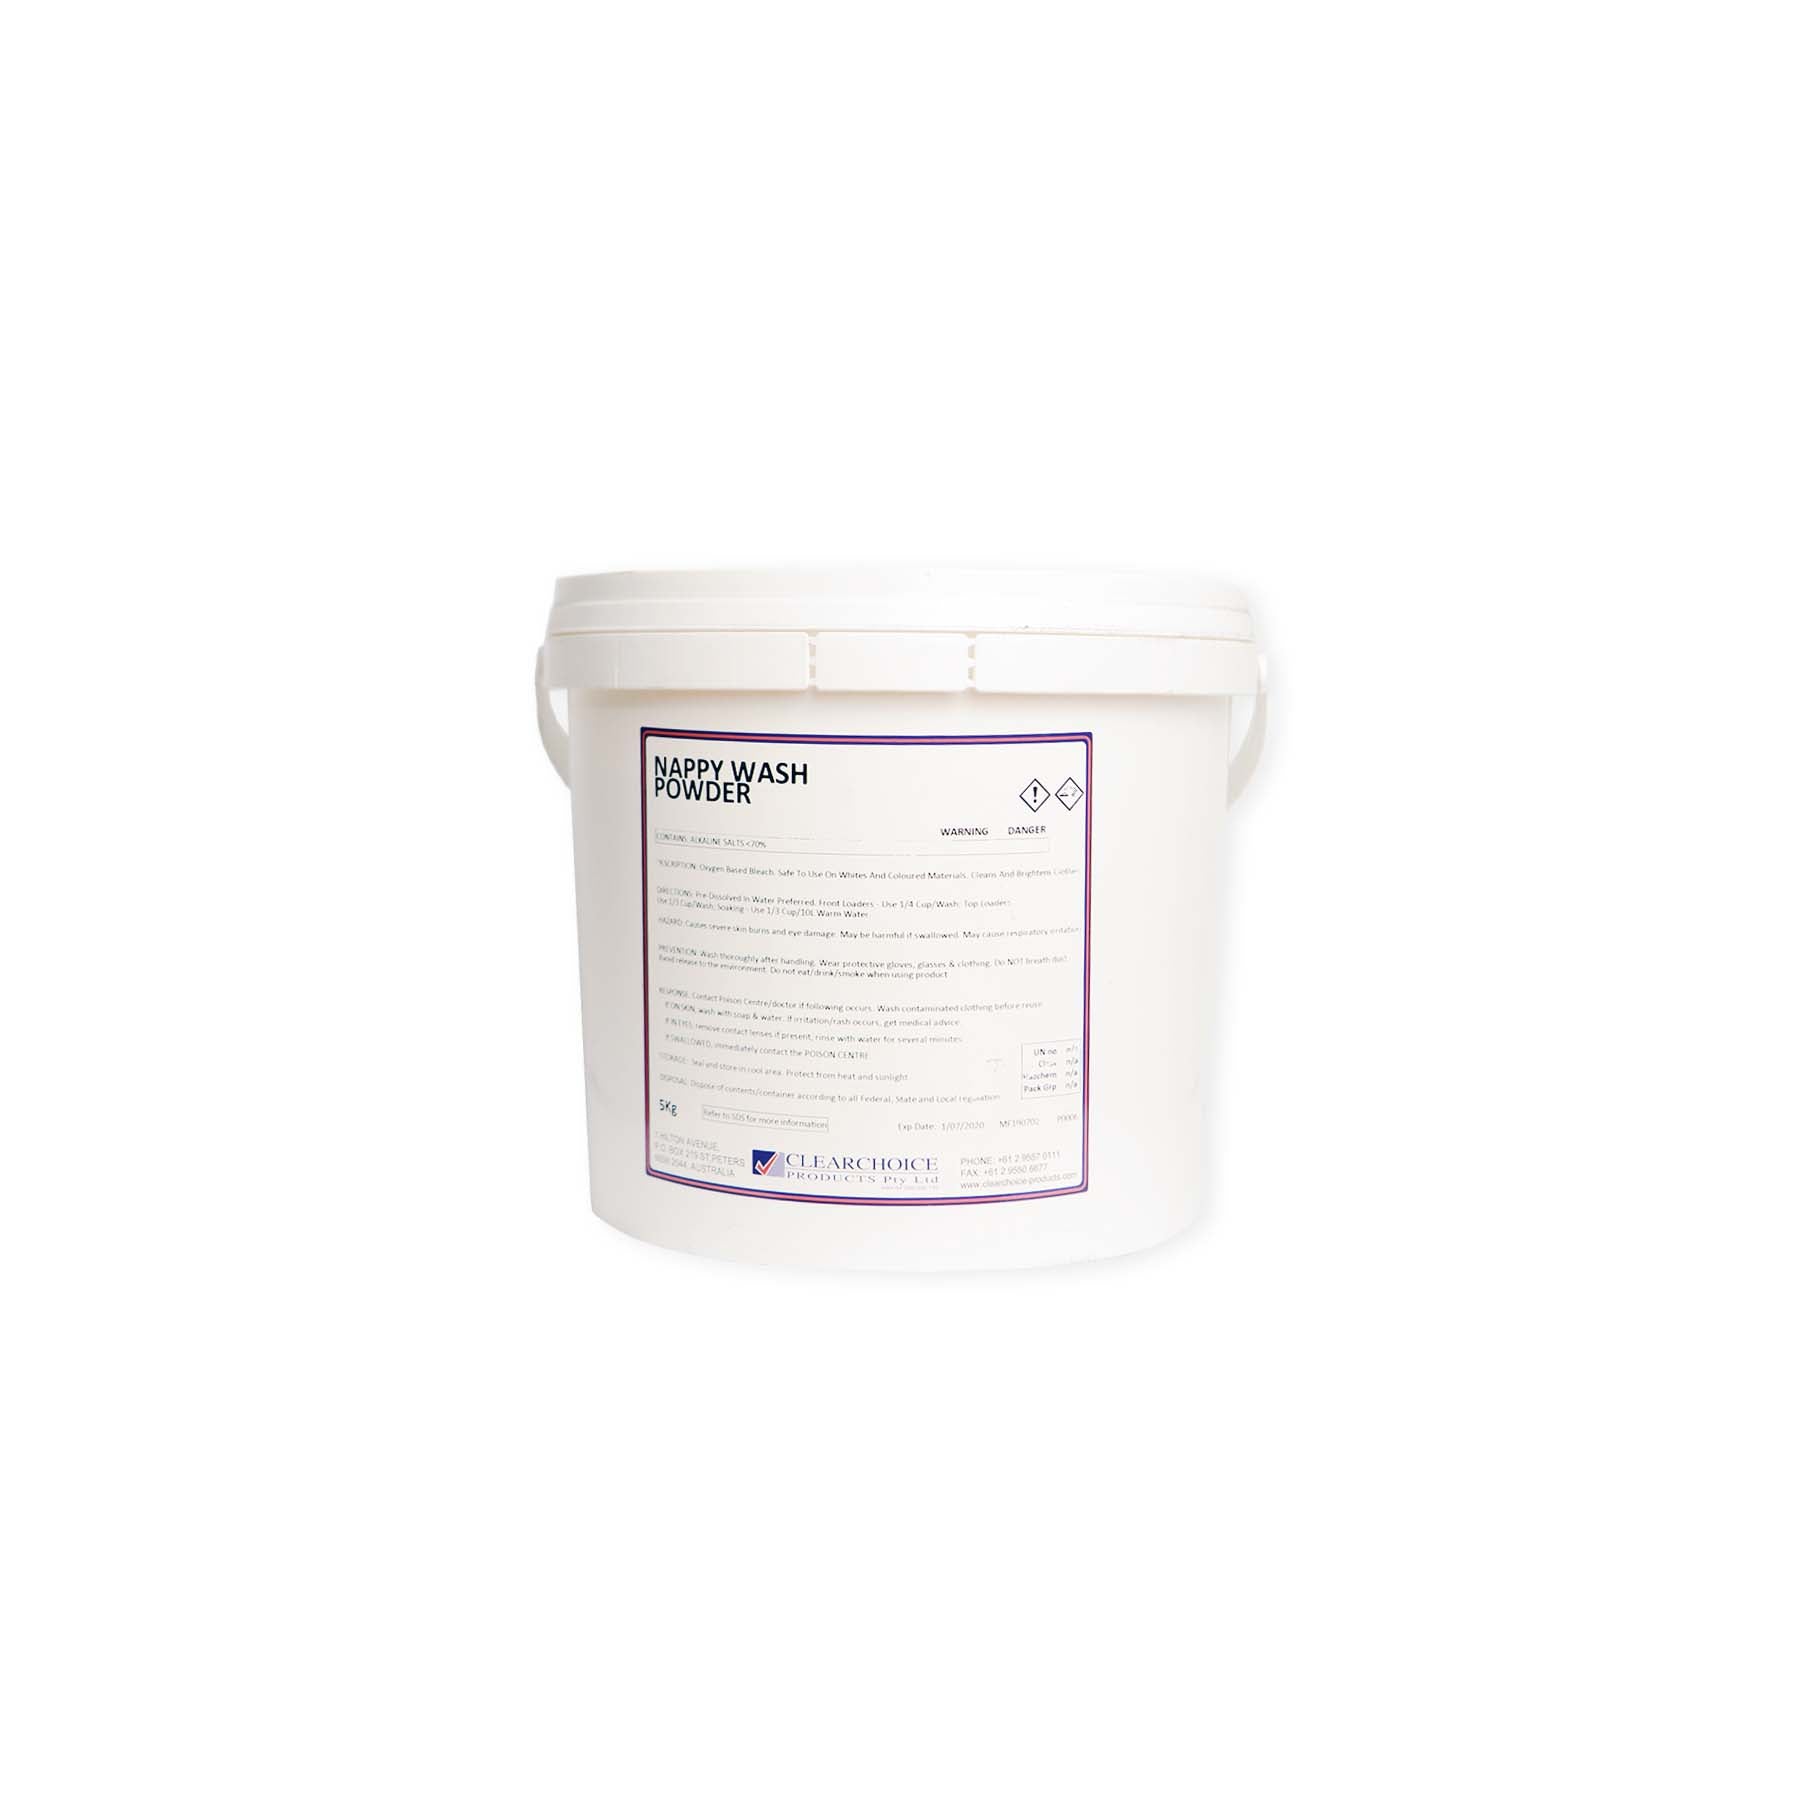 CLEARCHOICE NAPPY WASH POWDER 5KG